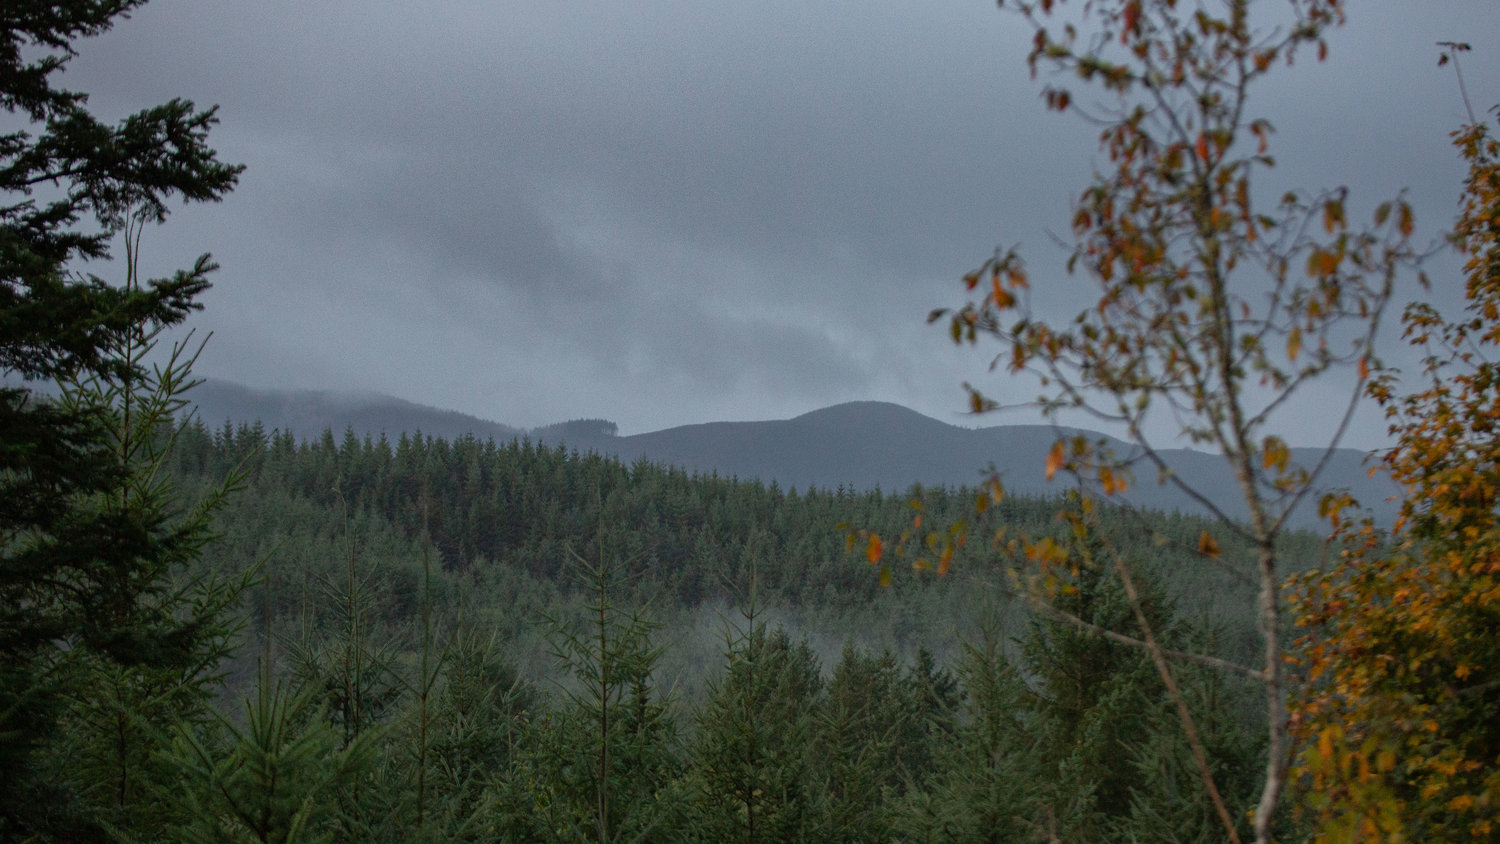 The Willapa Hills are pictured from the Boistfort Valley at dawn on Saturday, the first morning of elk season.